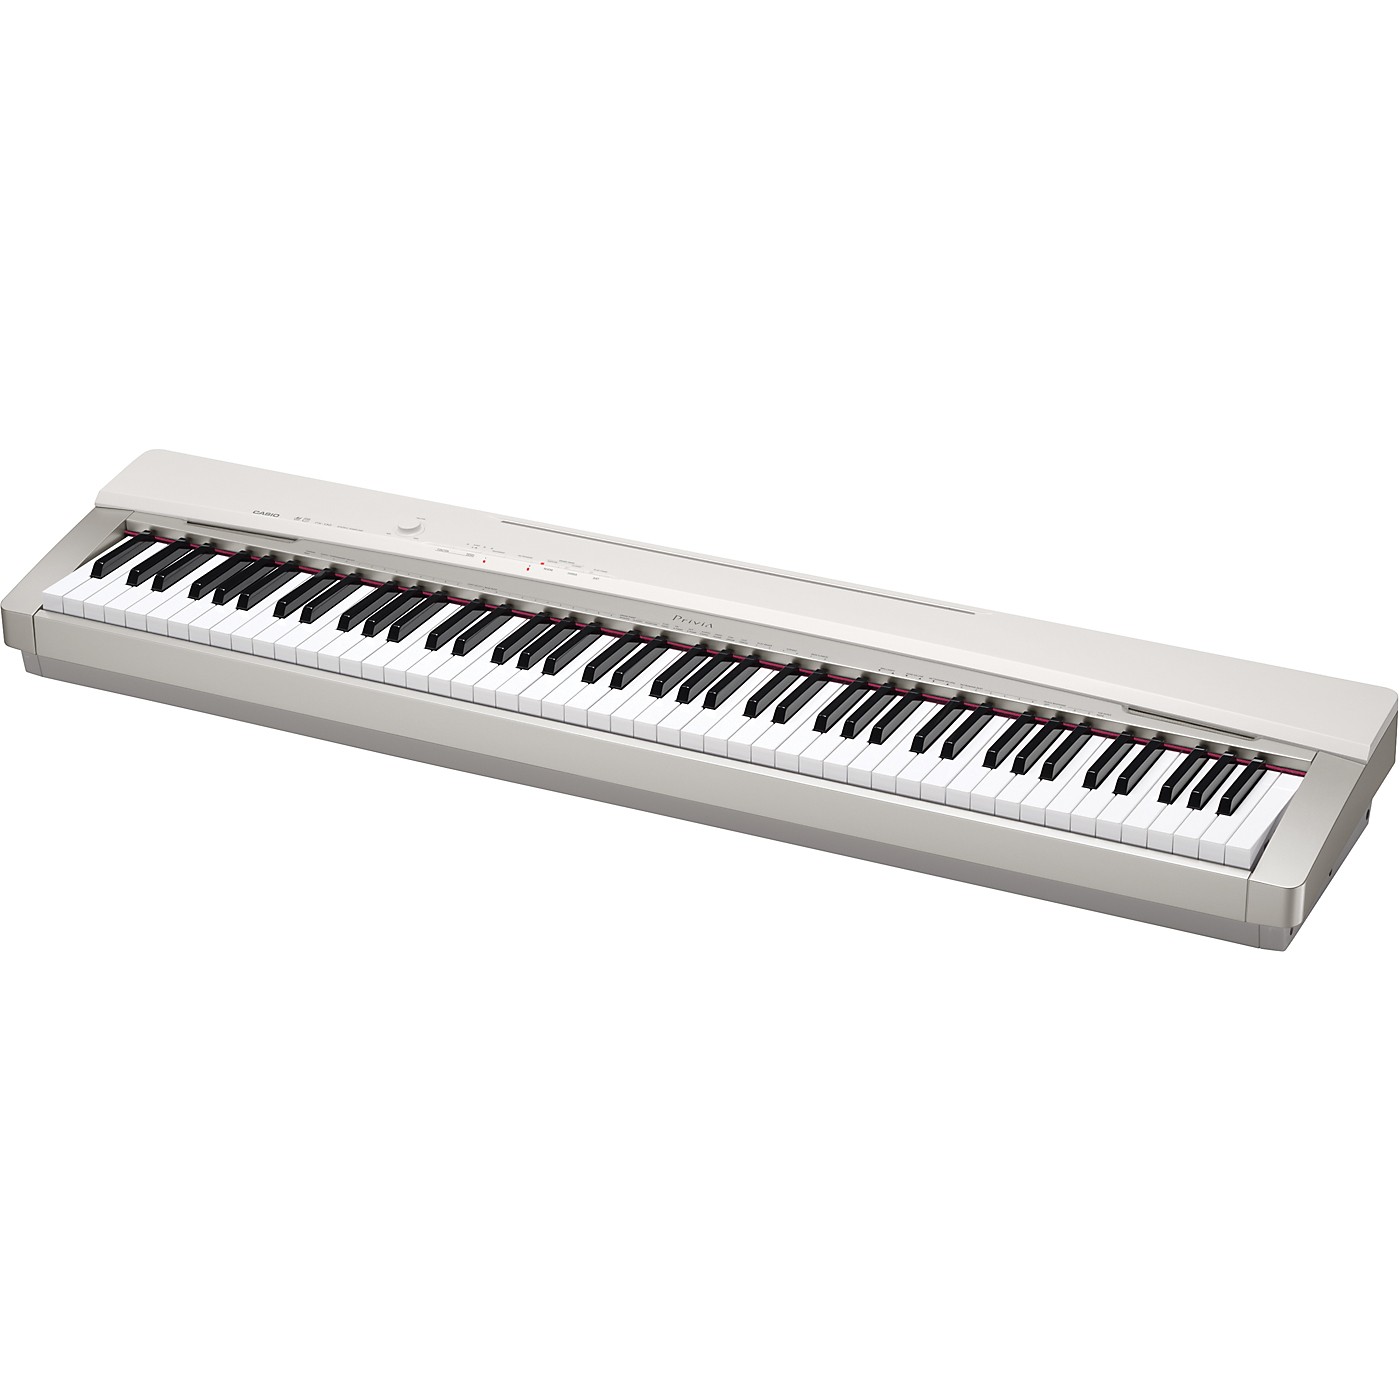 Casio Privia PX-130 Digital Piano with Matching Stand and 3-Pedal Assembly - Woodwind Brasswind